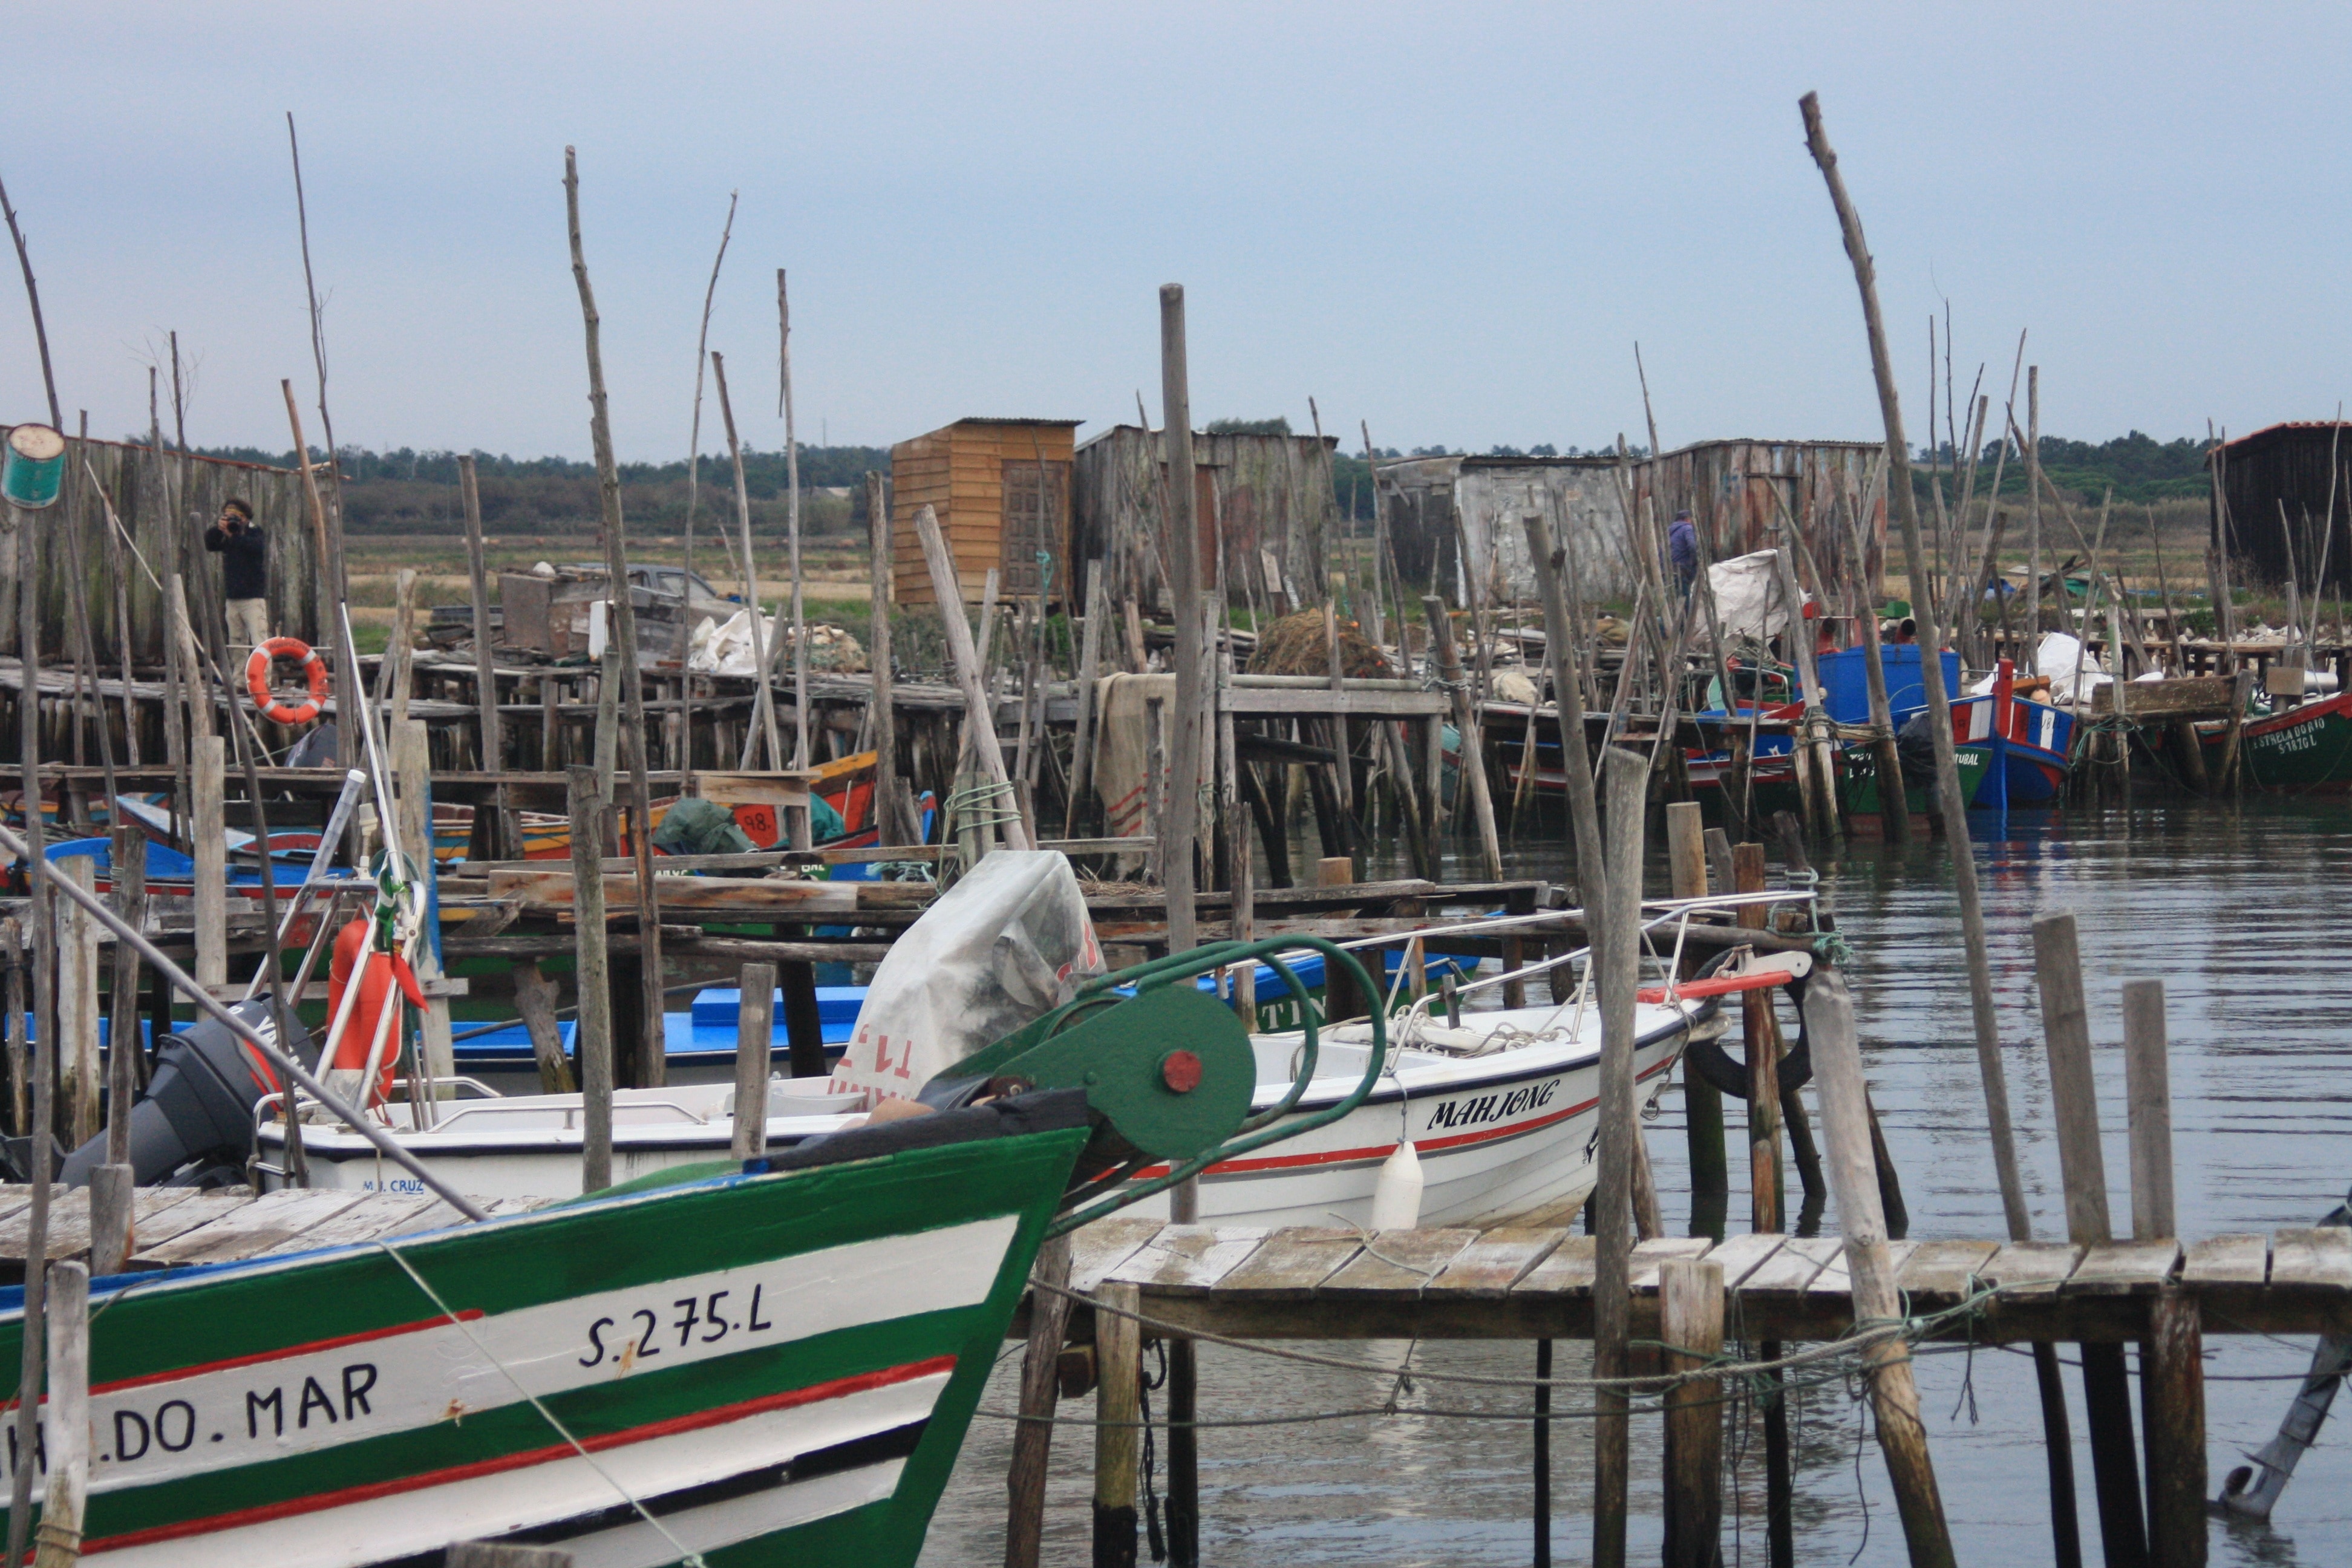 assorted fishing boats on dock during daytime